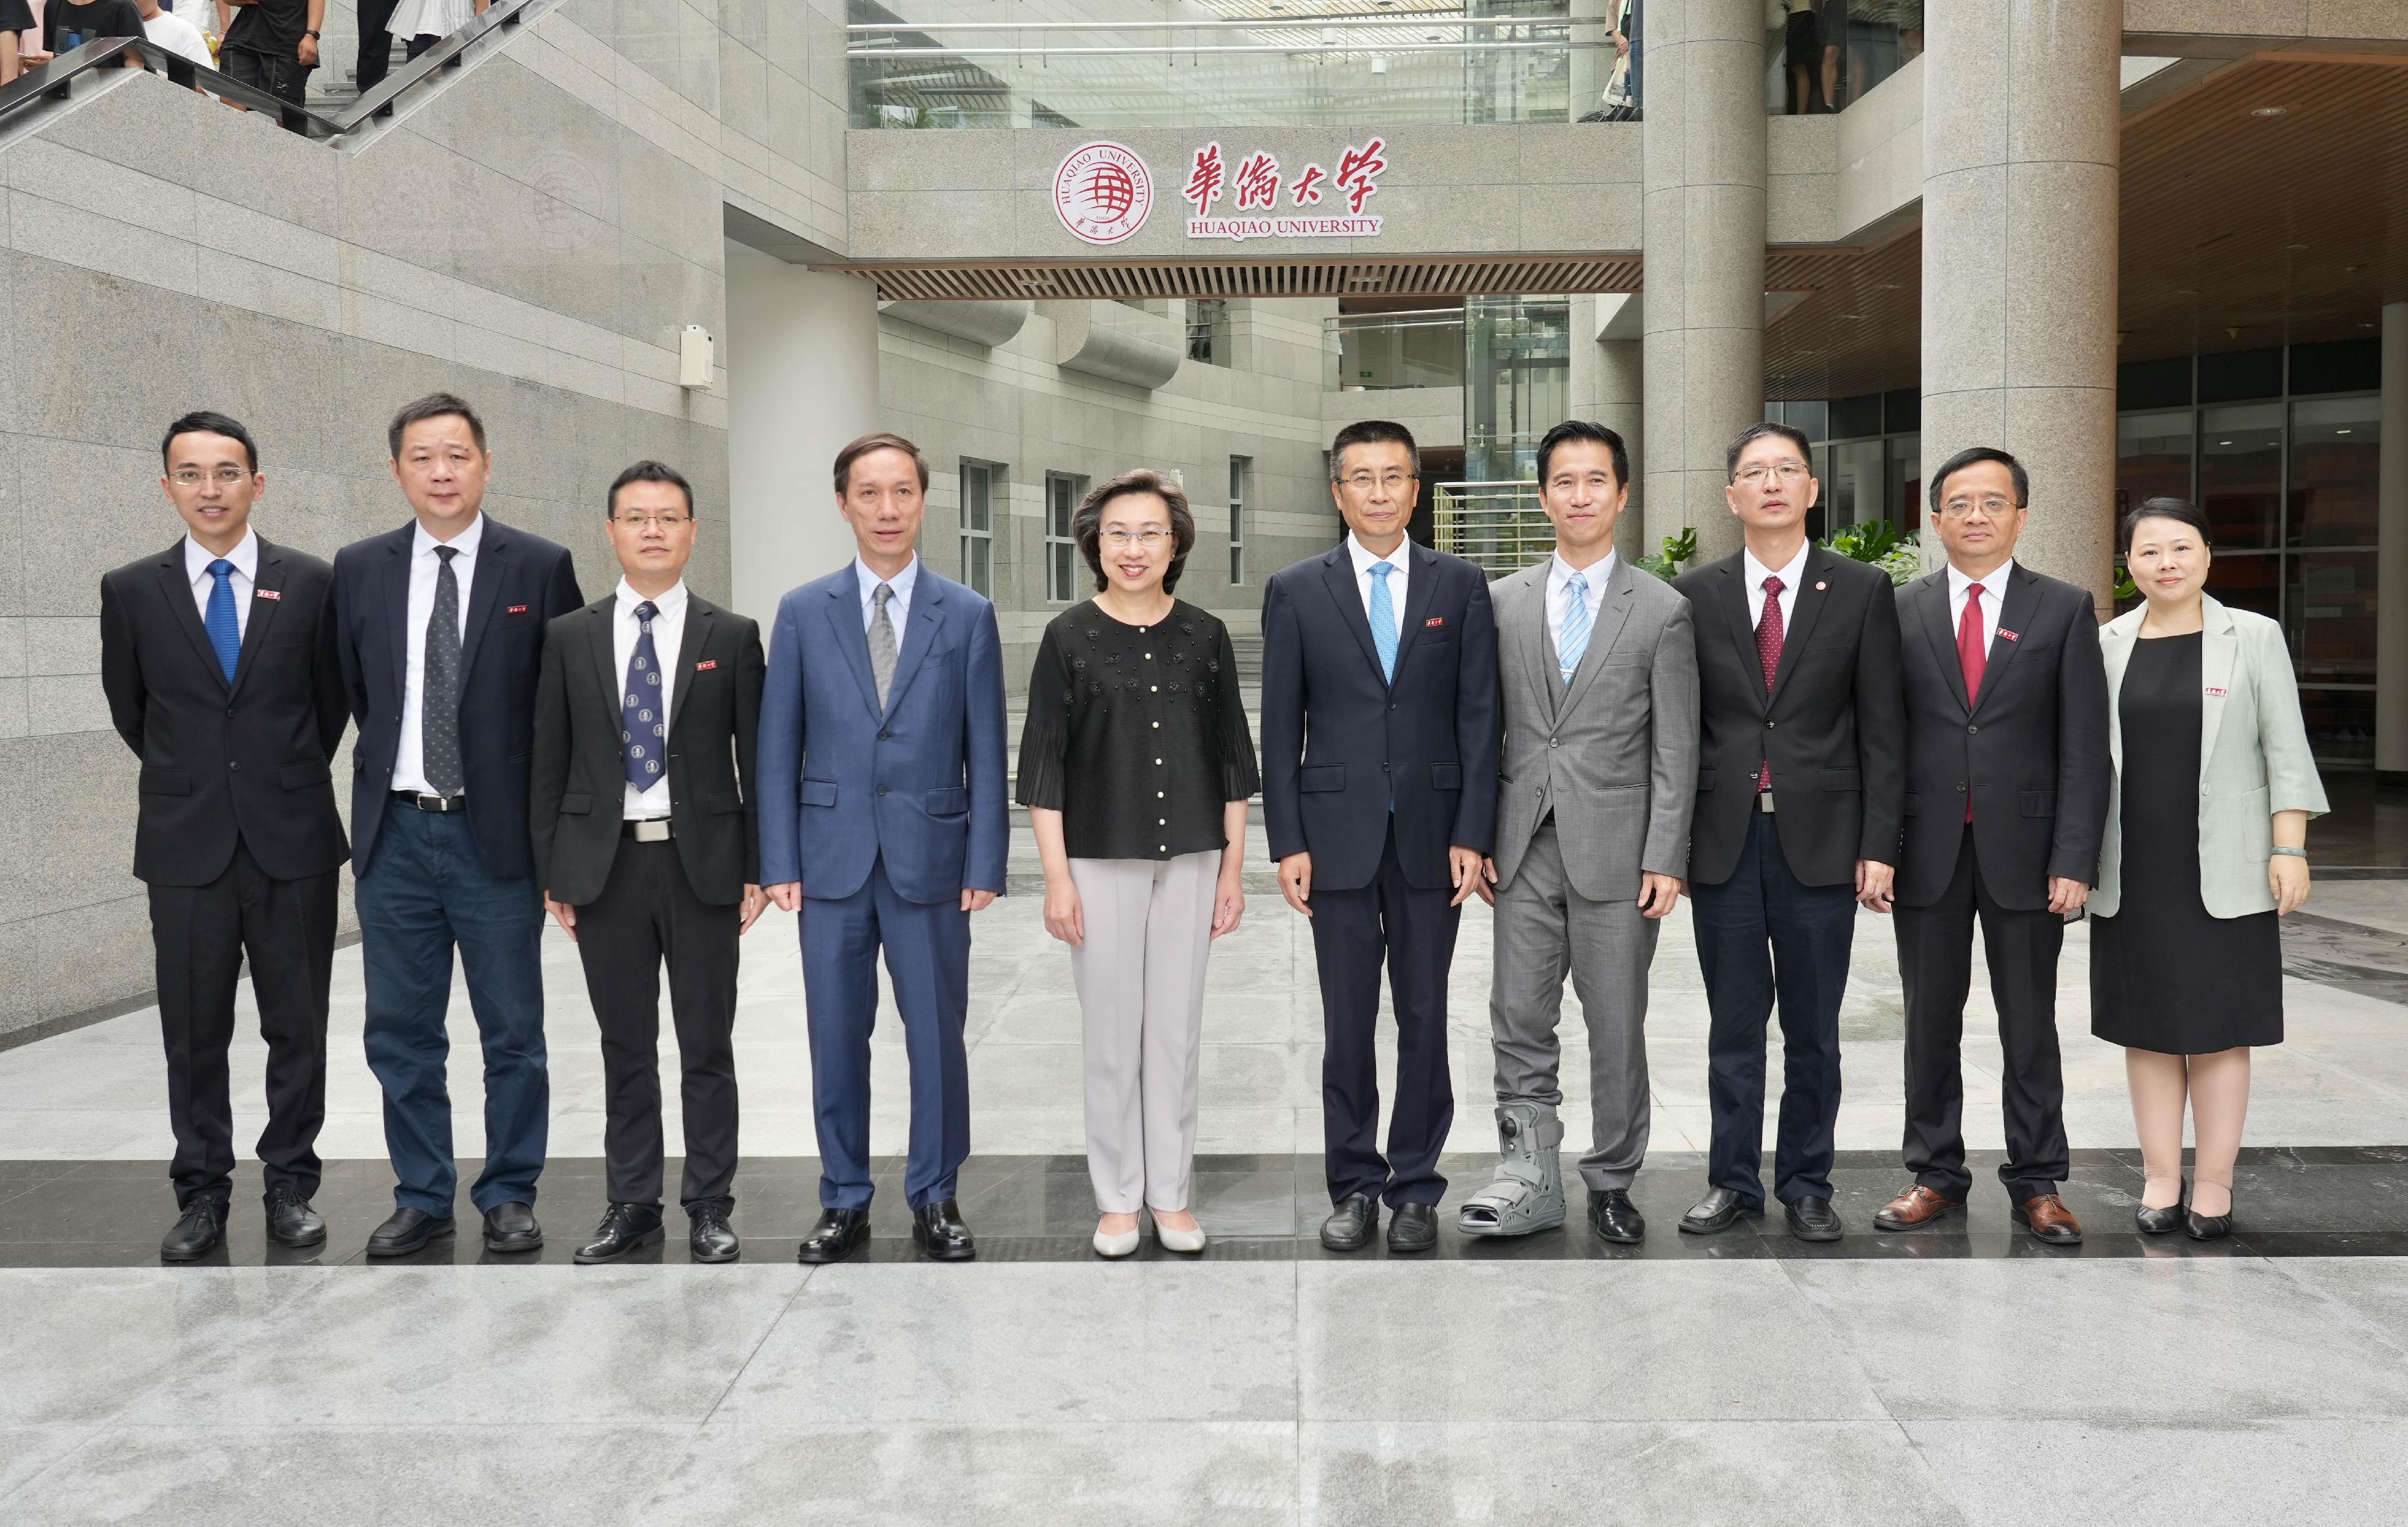 The Secretary for the Civil Service, Mrs Ingrid Yeung, today (September 7) met and exchanged views with the President of Huaqiao University, Mr Wu Jianping, and university staff in charge of student affairs at the Xiamen campus of the university in Fujian Province. Photo shows Mrs Yeung (fifth left); Mr Wu (fifth right); the Director of General Grades of the Civil Service Bureau, Mr Hermes Chan (fourth left); and the Director of Fujian Liaison Unit of the Hong Kong Special Administrative Region Government, Mr Ricky Cheng (fourth right), at the university.